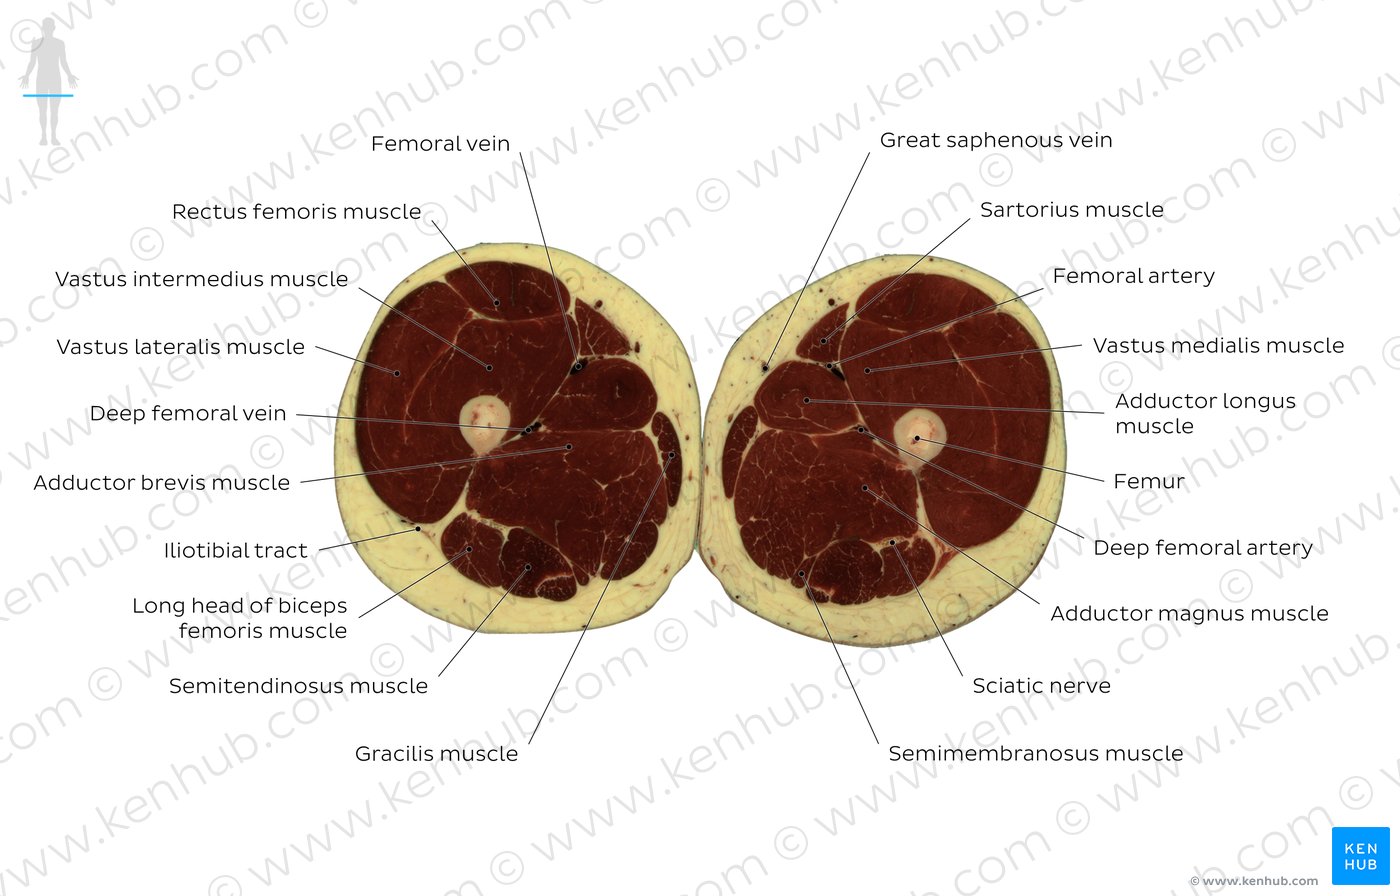 Cross section of the thigh through the adductor longus muscle: Diagram